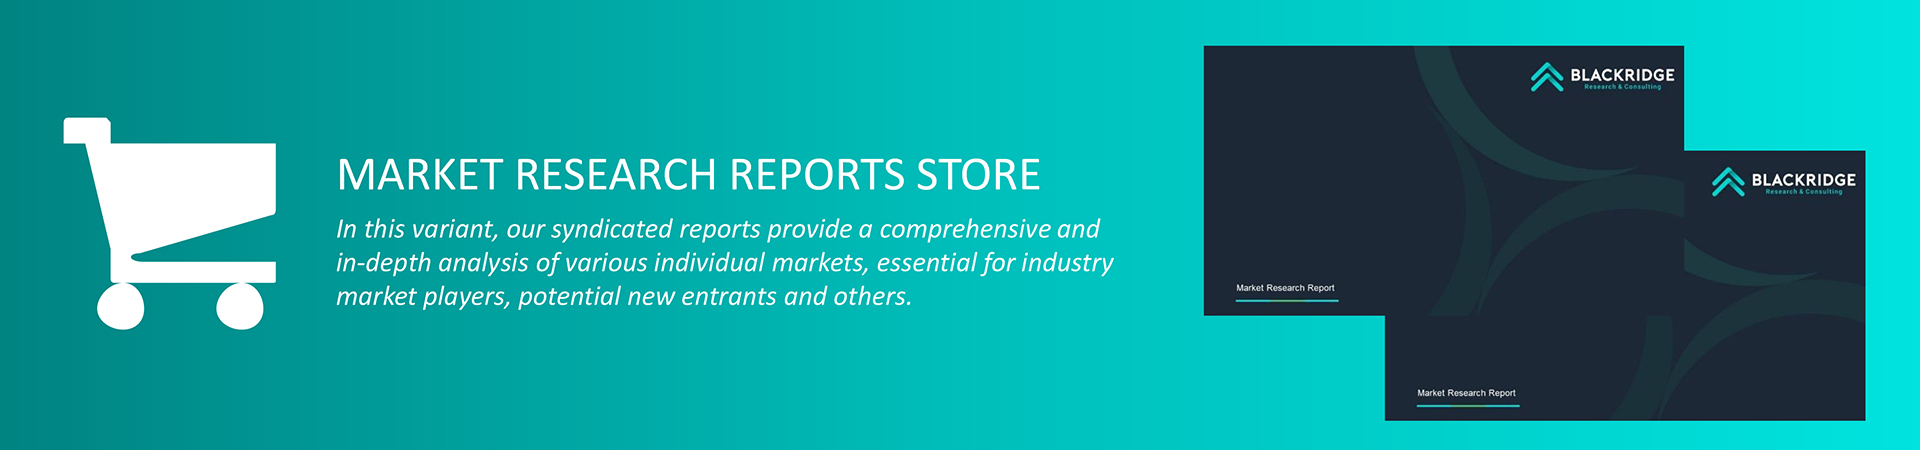 market research report store inc